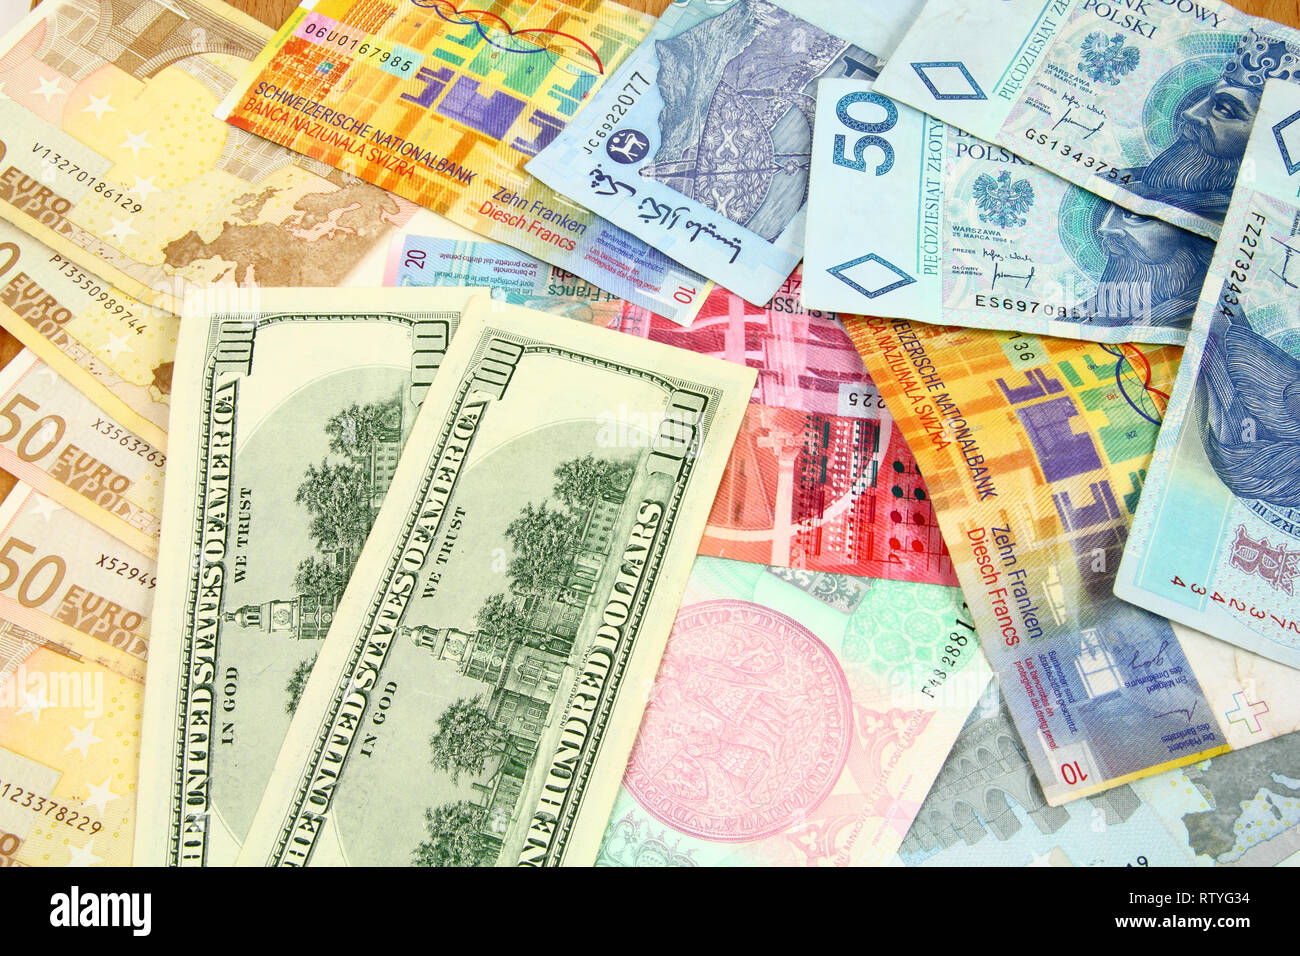 World finance and foreign currency exchange concept - money background with US dollars, Swiss franks, Polish zloty, Euros, Malaysian ringgits and Czec Stock Photo